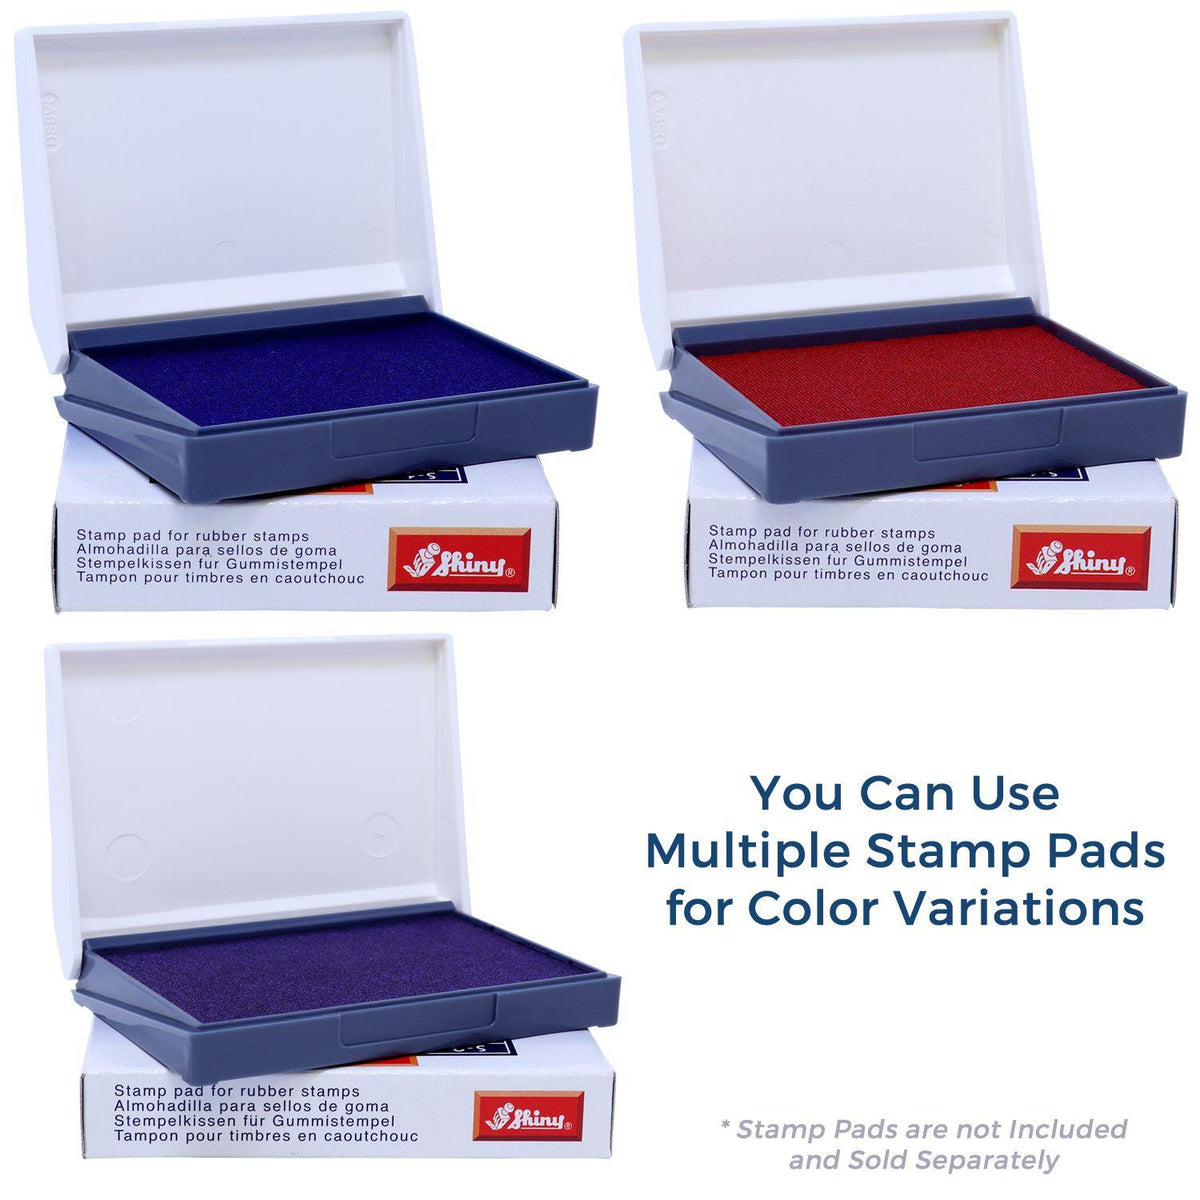 Stamp Pads for Large Photographs Do Not Bend Rubber Stamp Available